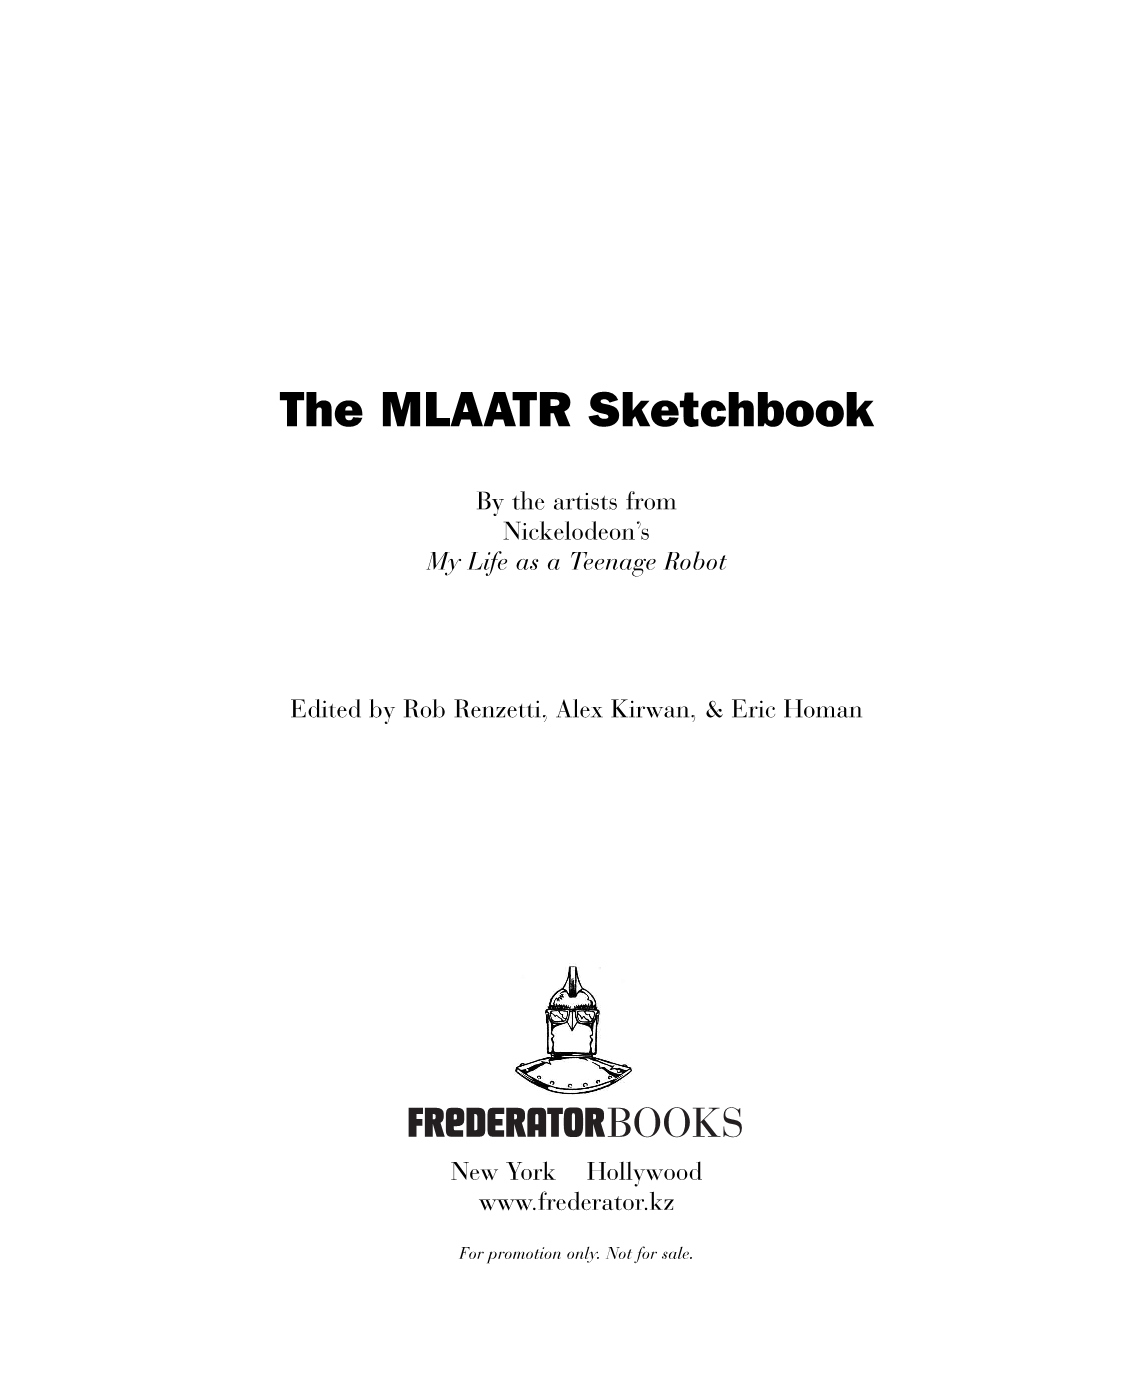 The MLaaTR Sketchbook by the artists from My Life as a Teenage Robot [1st Edition 2004] 1